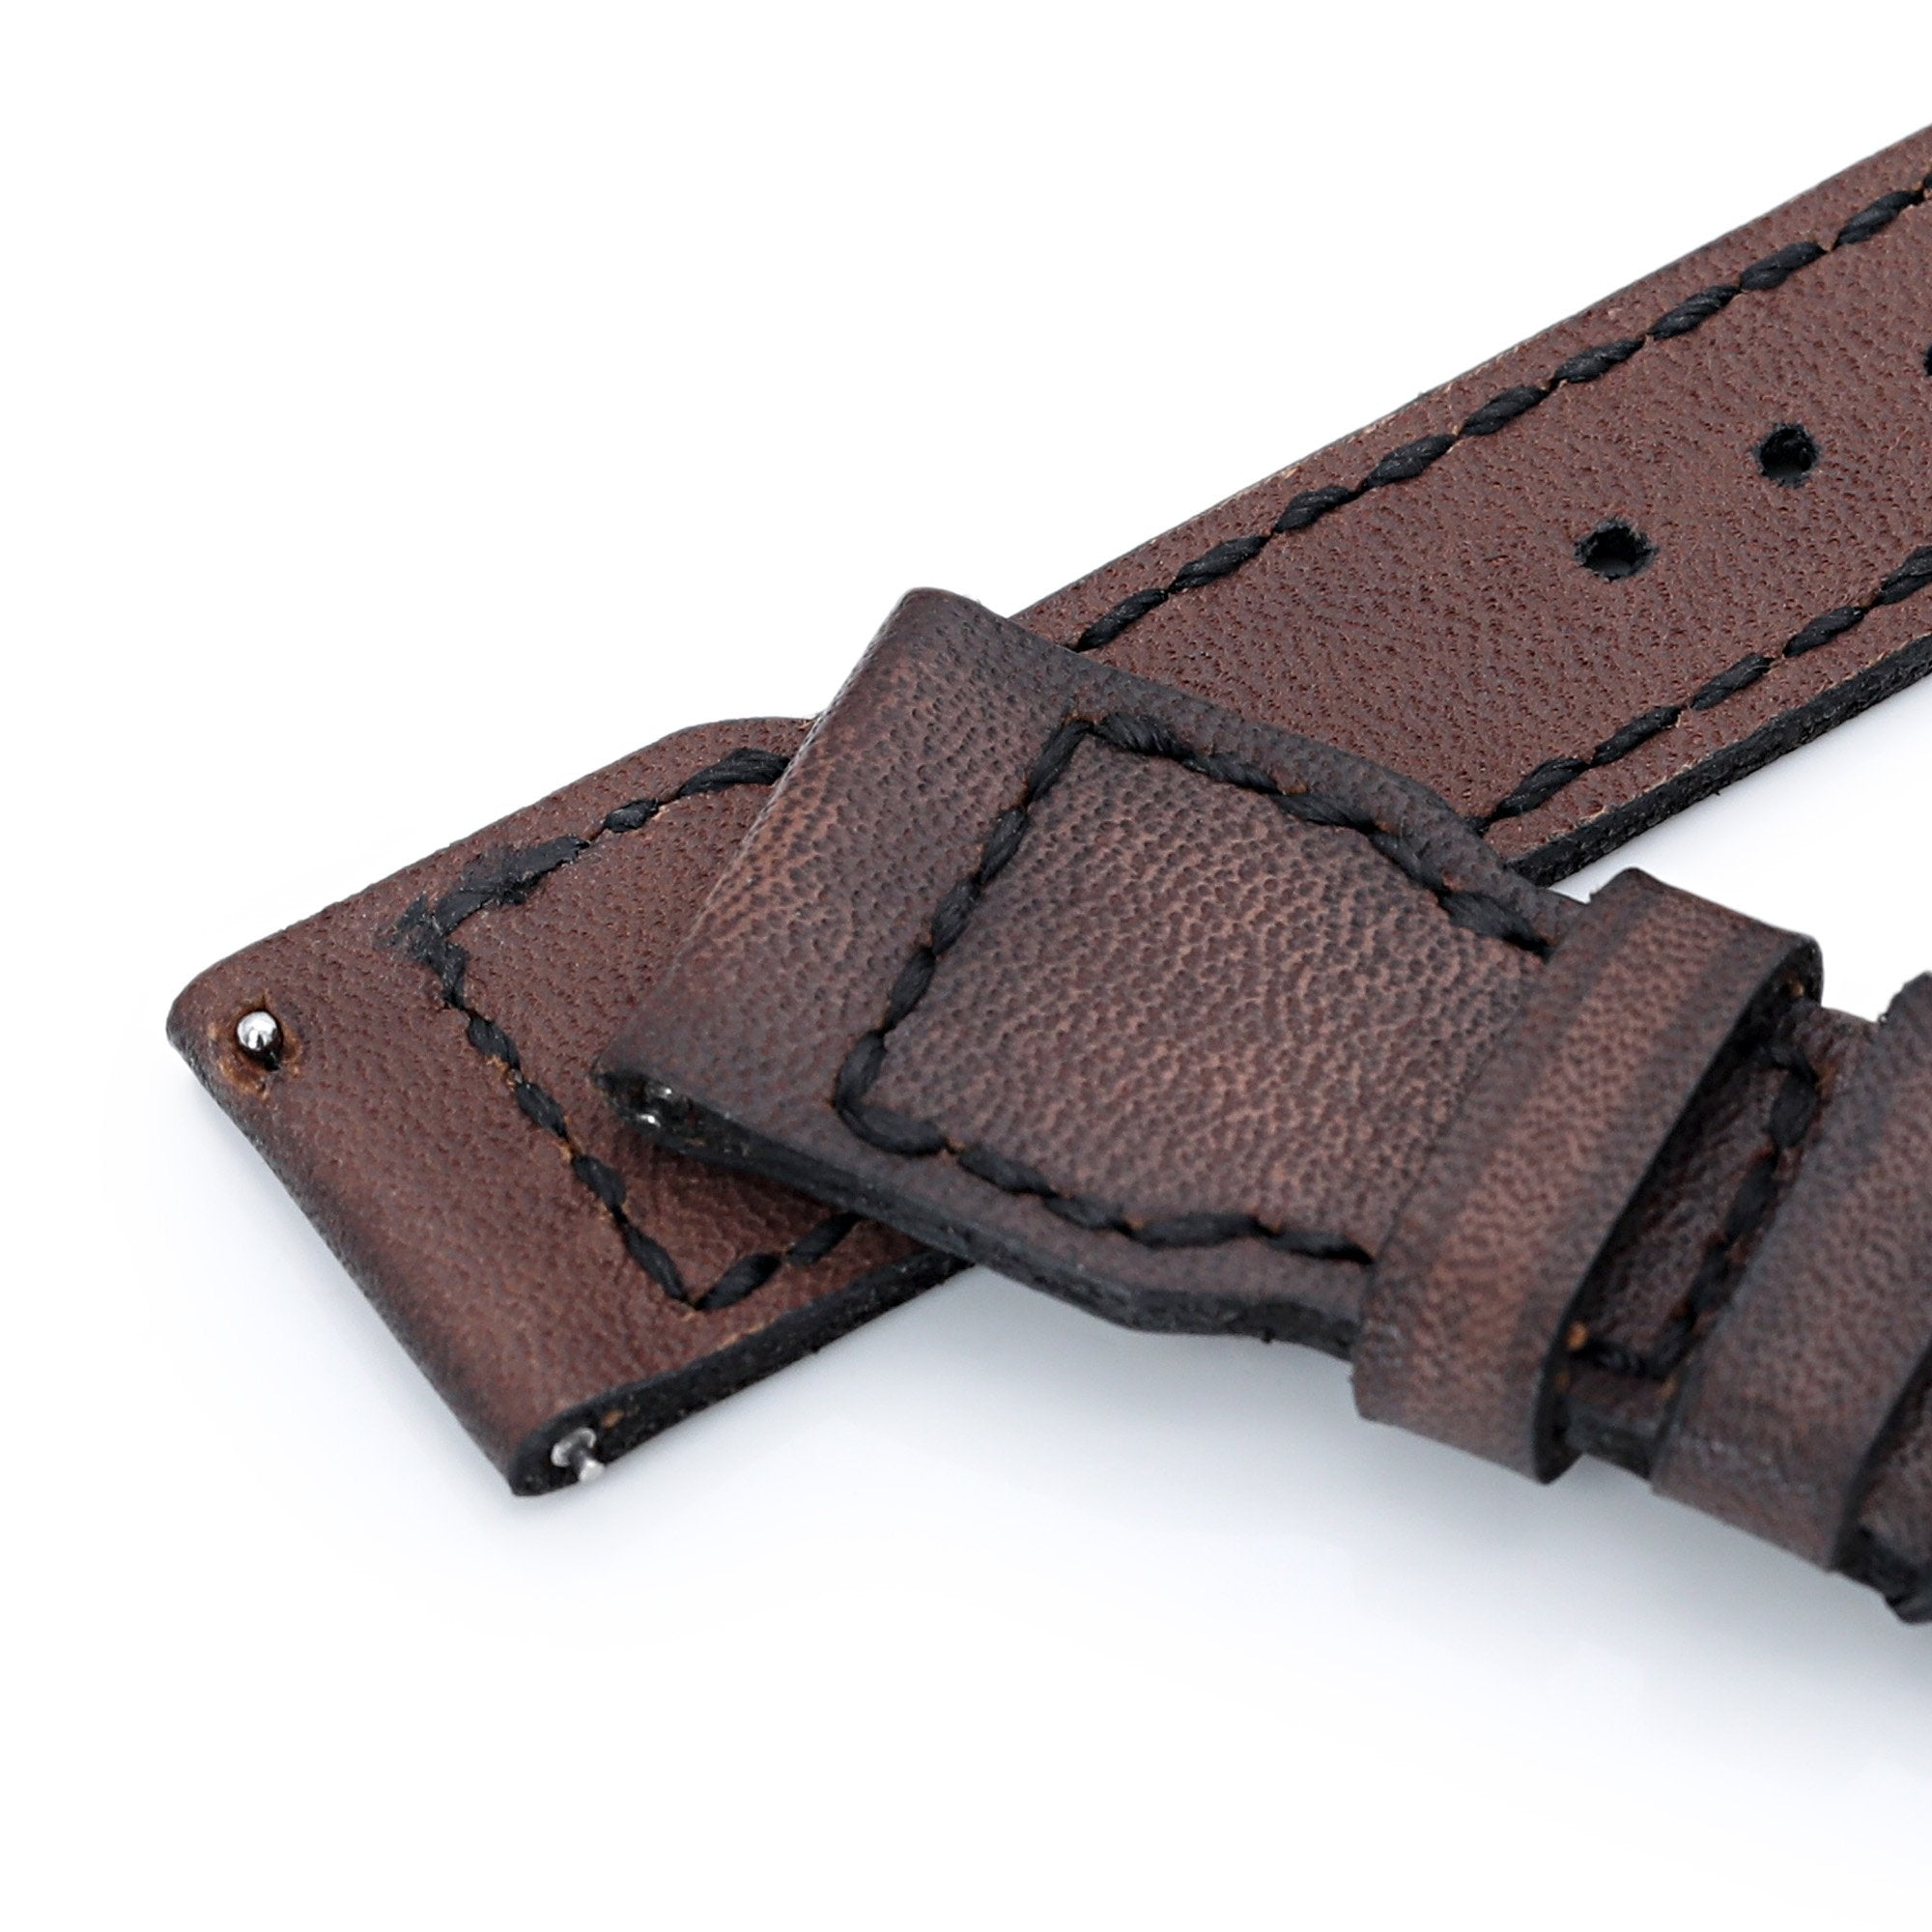 22mm Gunny X MT Dark Brown Handmade for IWC Big Pilot Quick Release Leather Watch Strap Strapcode Watch Bands